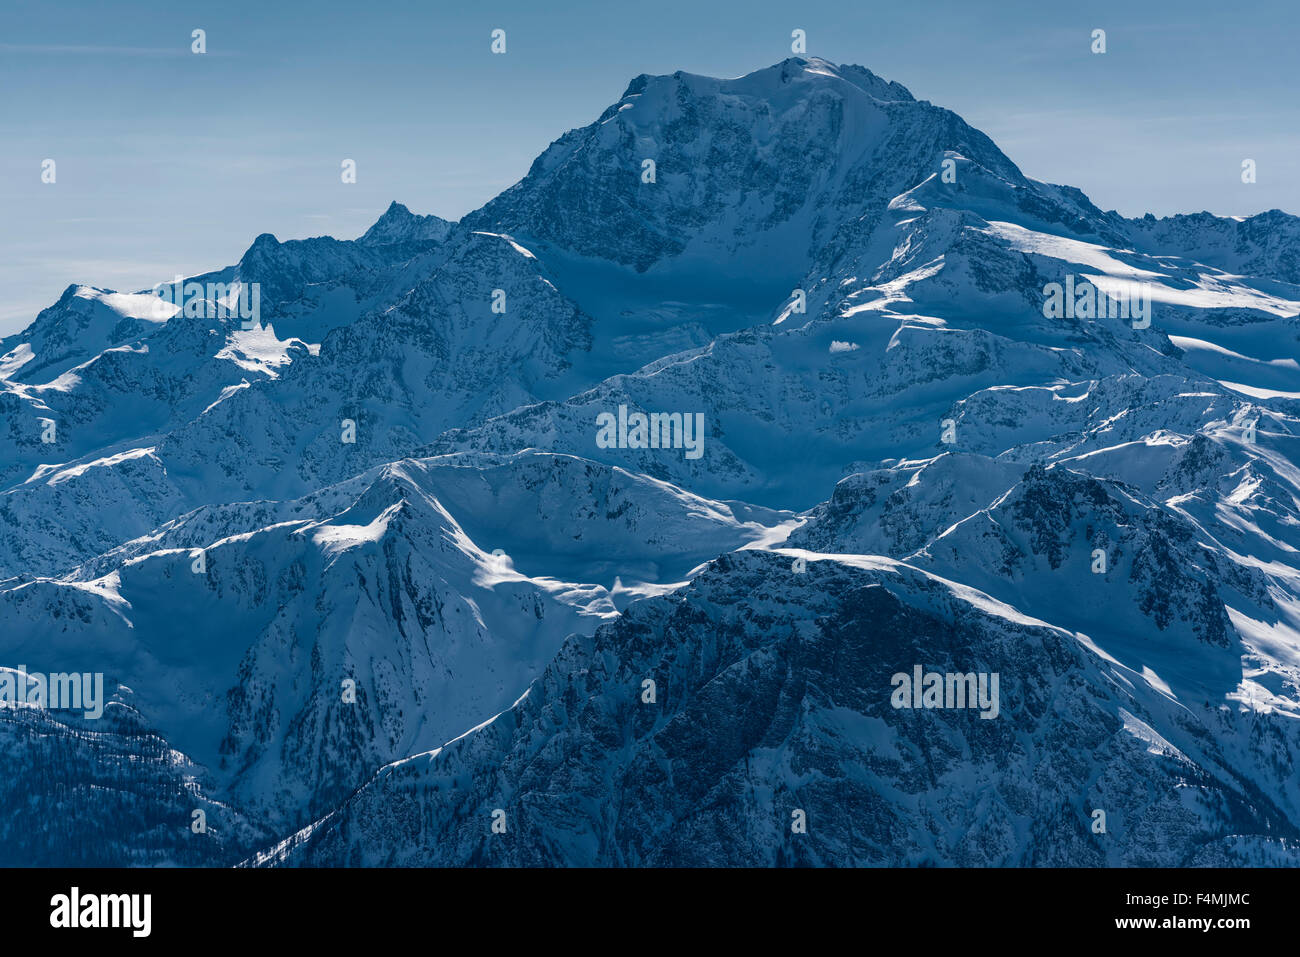 Snow covered mountain peak of mount Glishorn (2525m) in Switzerland (Valais canton), seen from Belalp. Stock Photo